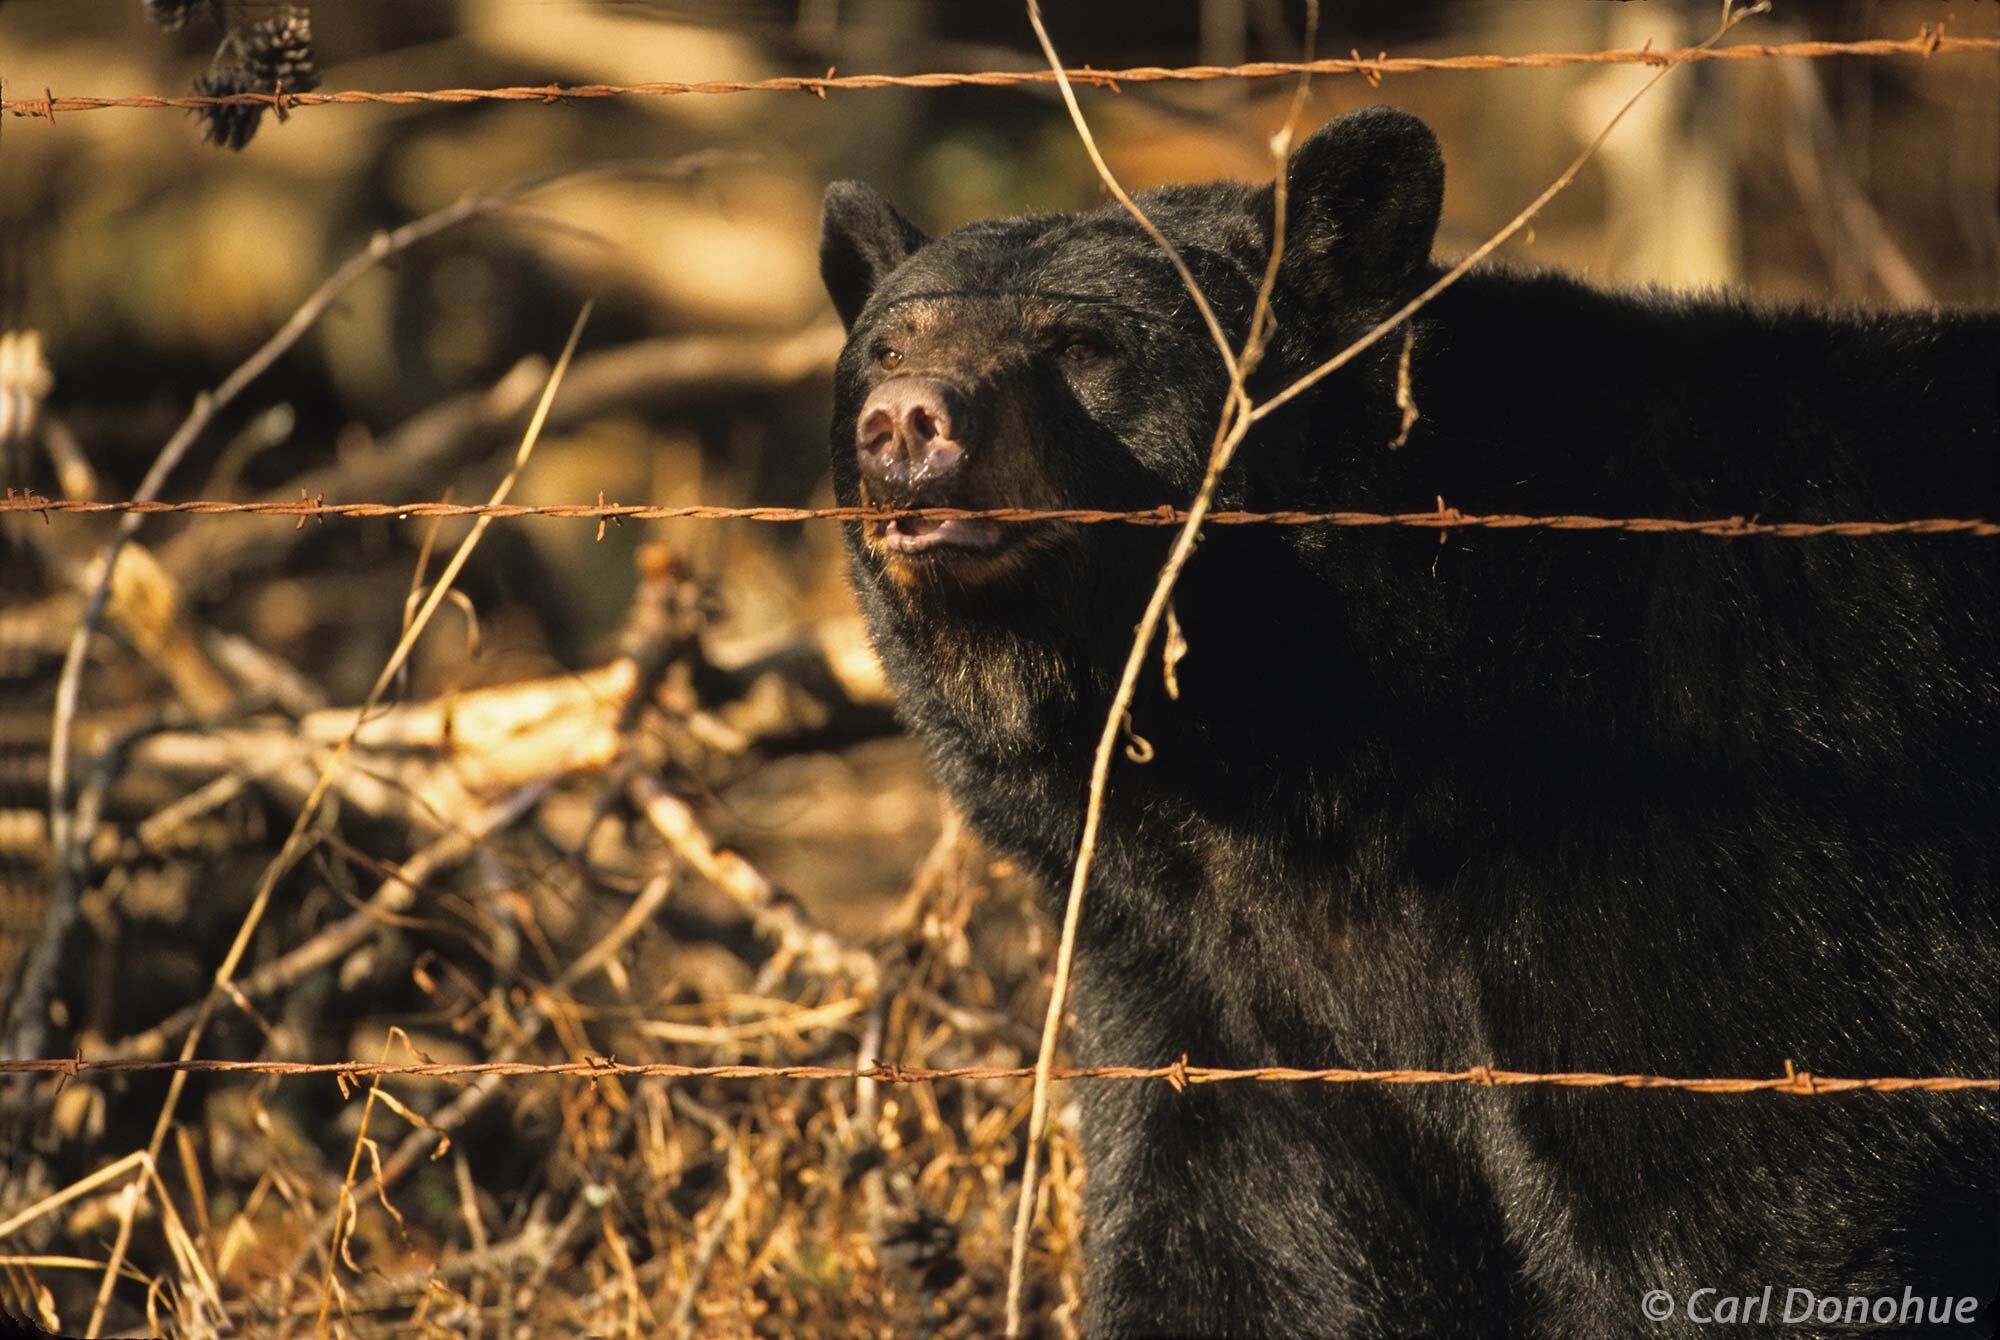 Black bear biting a wire fence in its teeth. Black bear gripping a fence, peering through the wires in Cades Cove, Great Smoky...